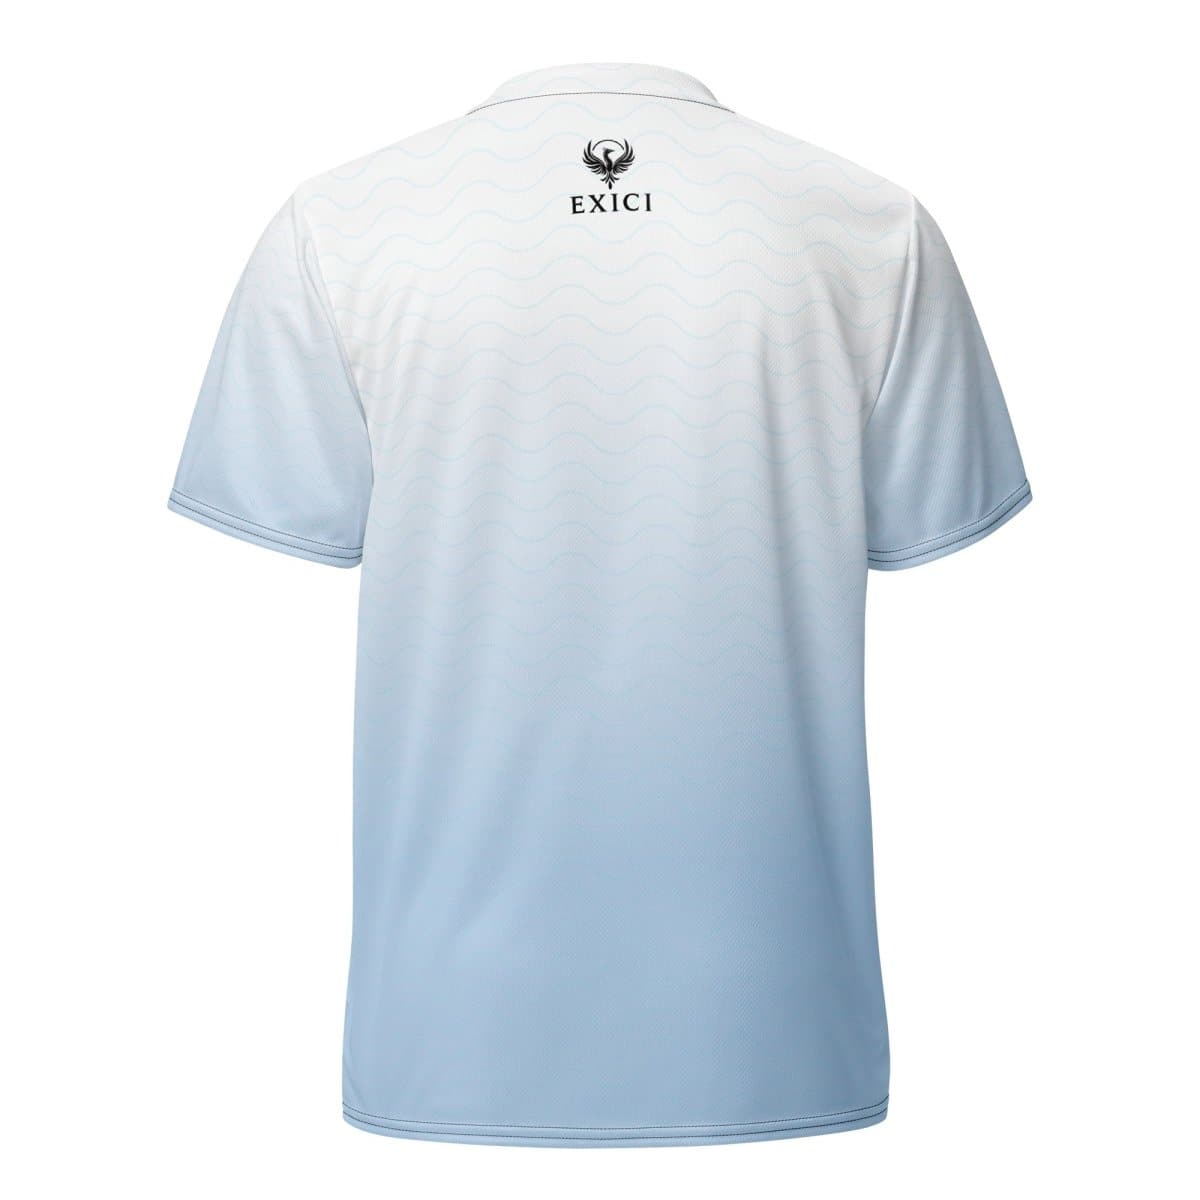 Sky Whisper Chic Tee - Exici